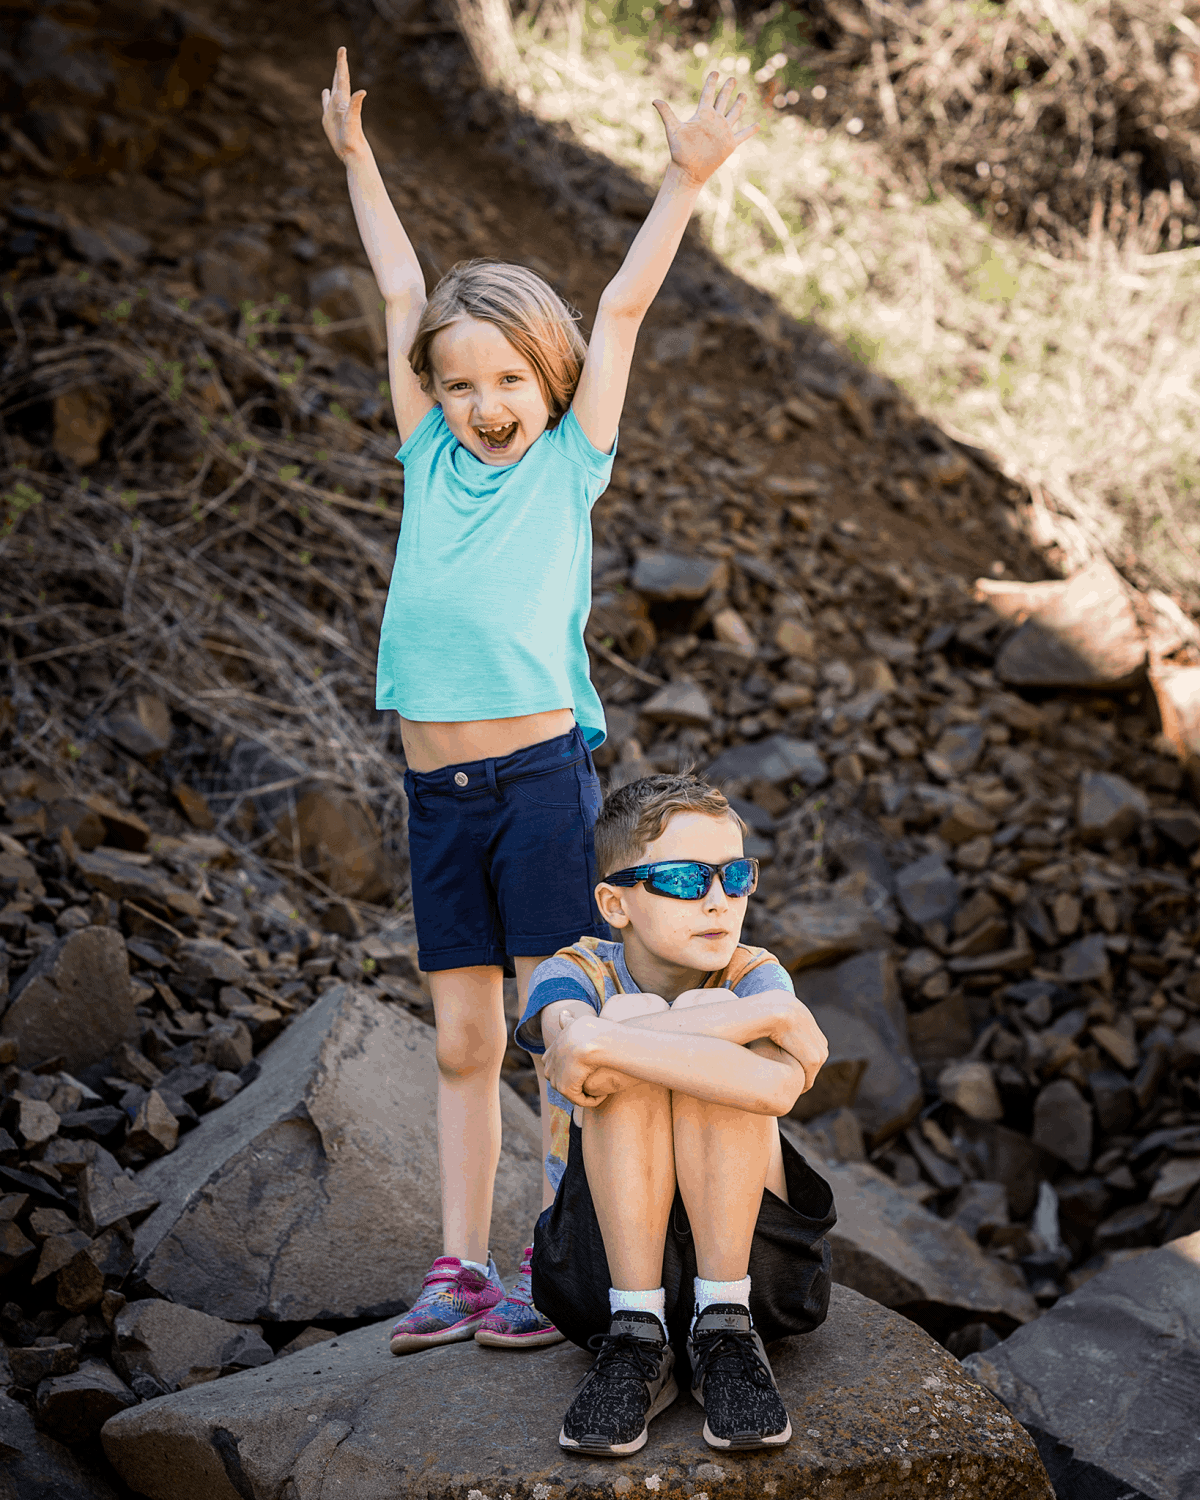 Central Washington road trip - Cowiche Canyon hike with kids